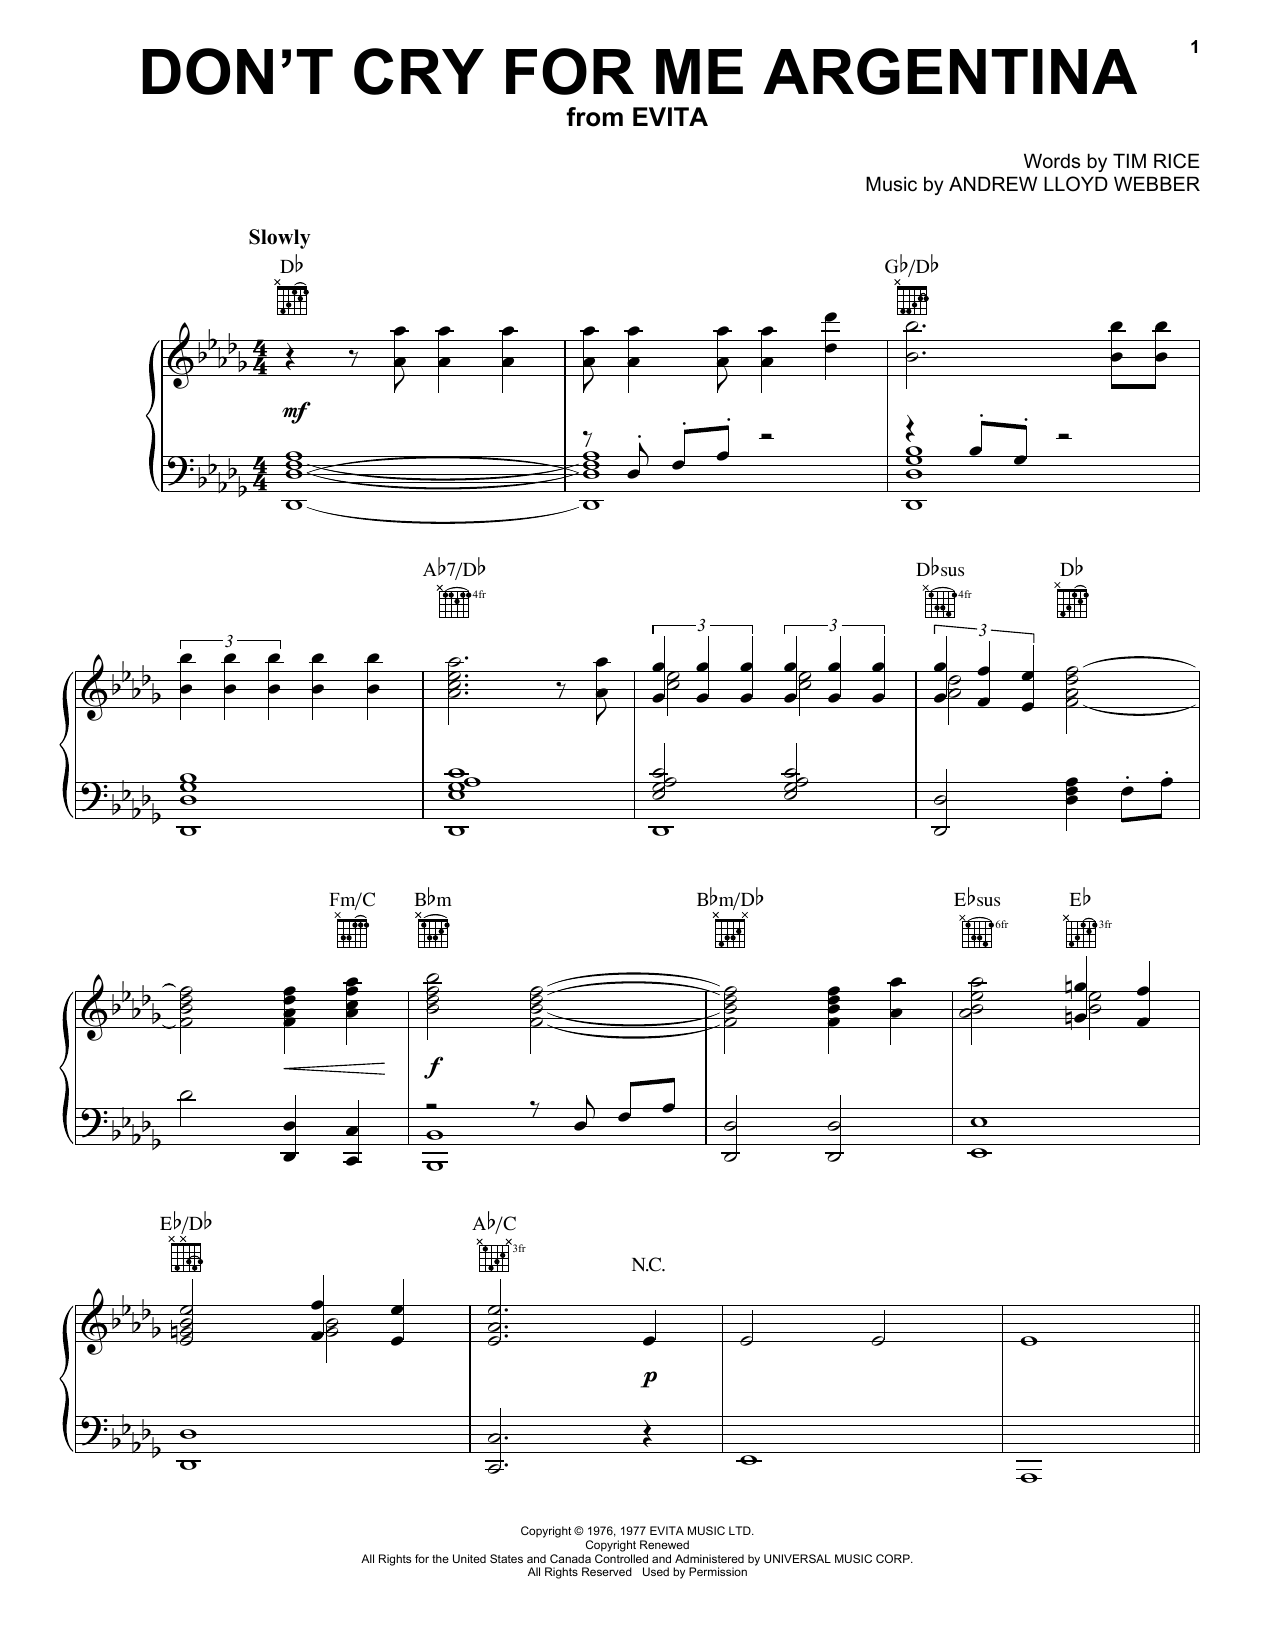 Andrew Lloyd Webber Don't Cry For Me Argentina sheet music notes and chords. Download Printable PDF.